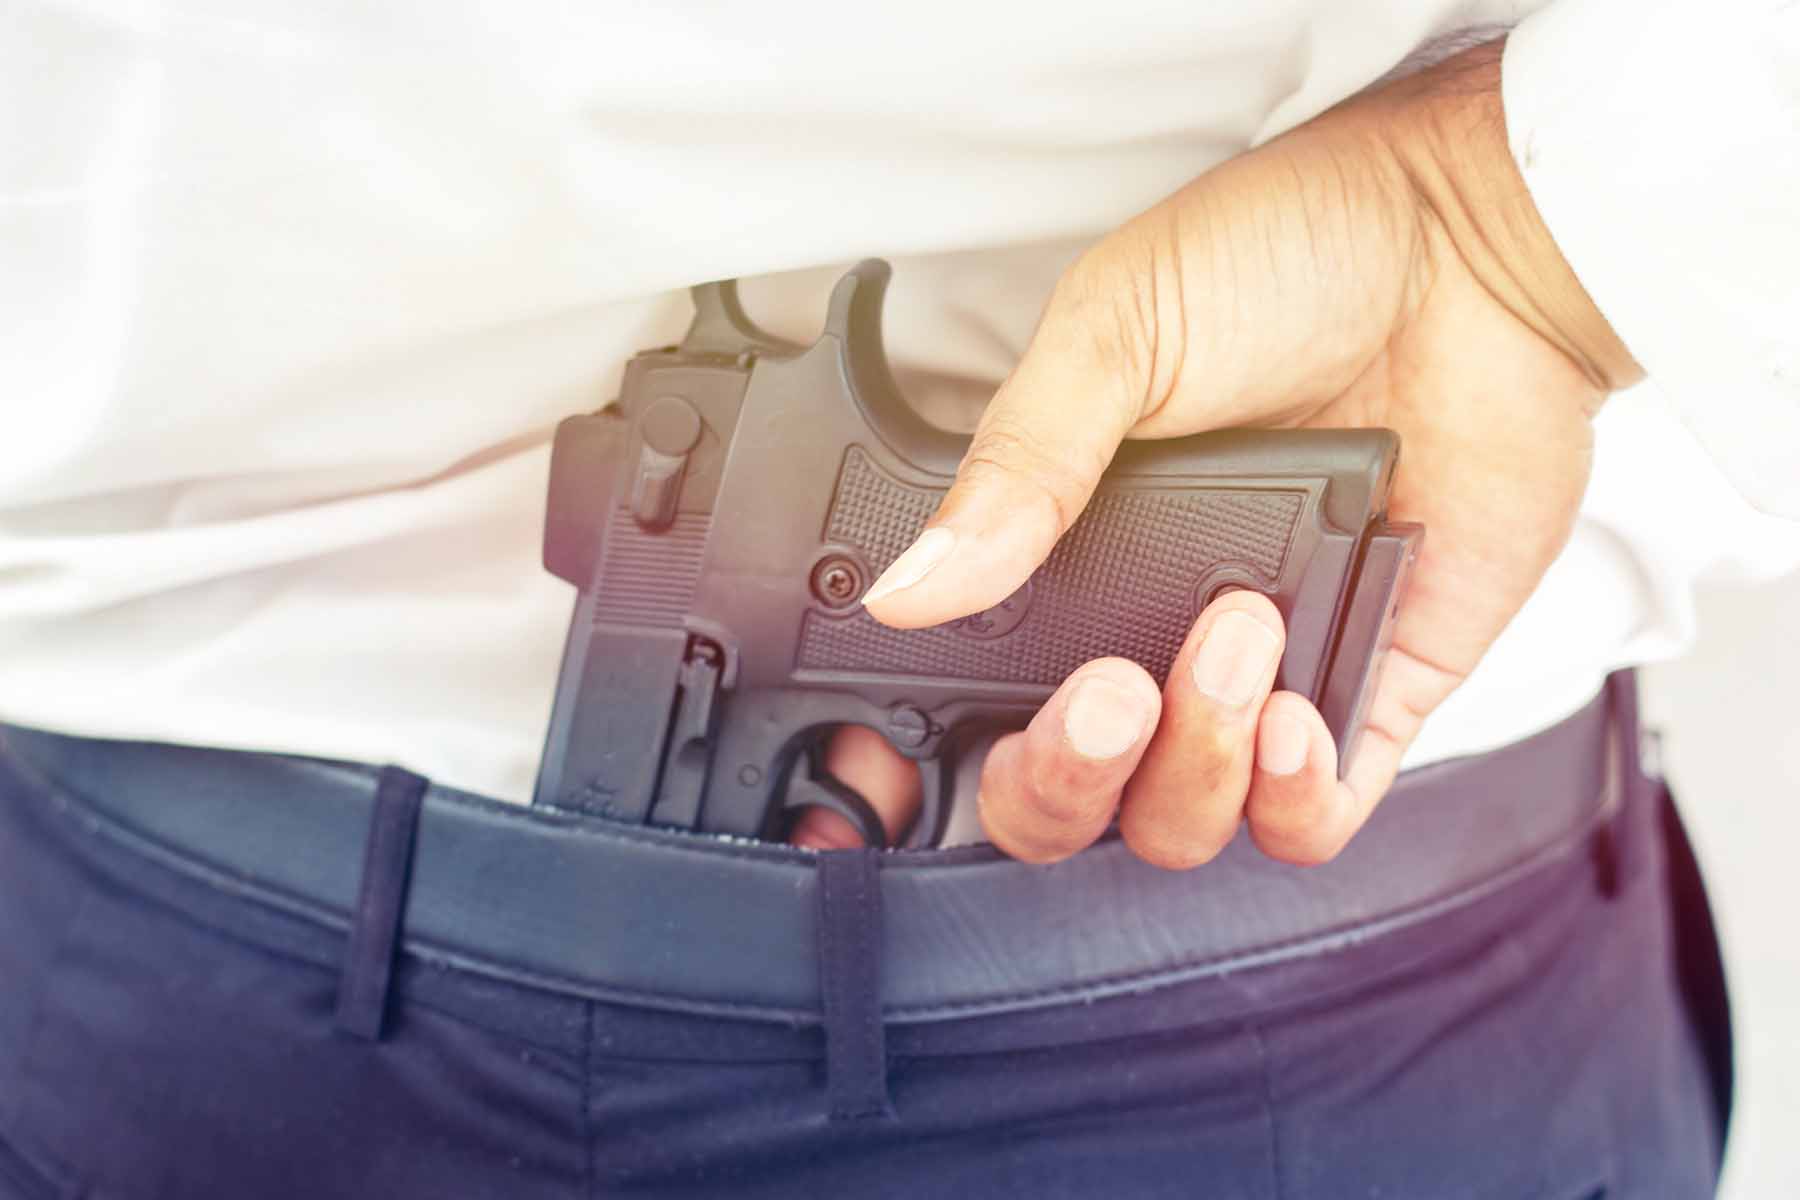 Cropped view of a man’s hand tucking his handgun into the back of his jeans.